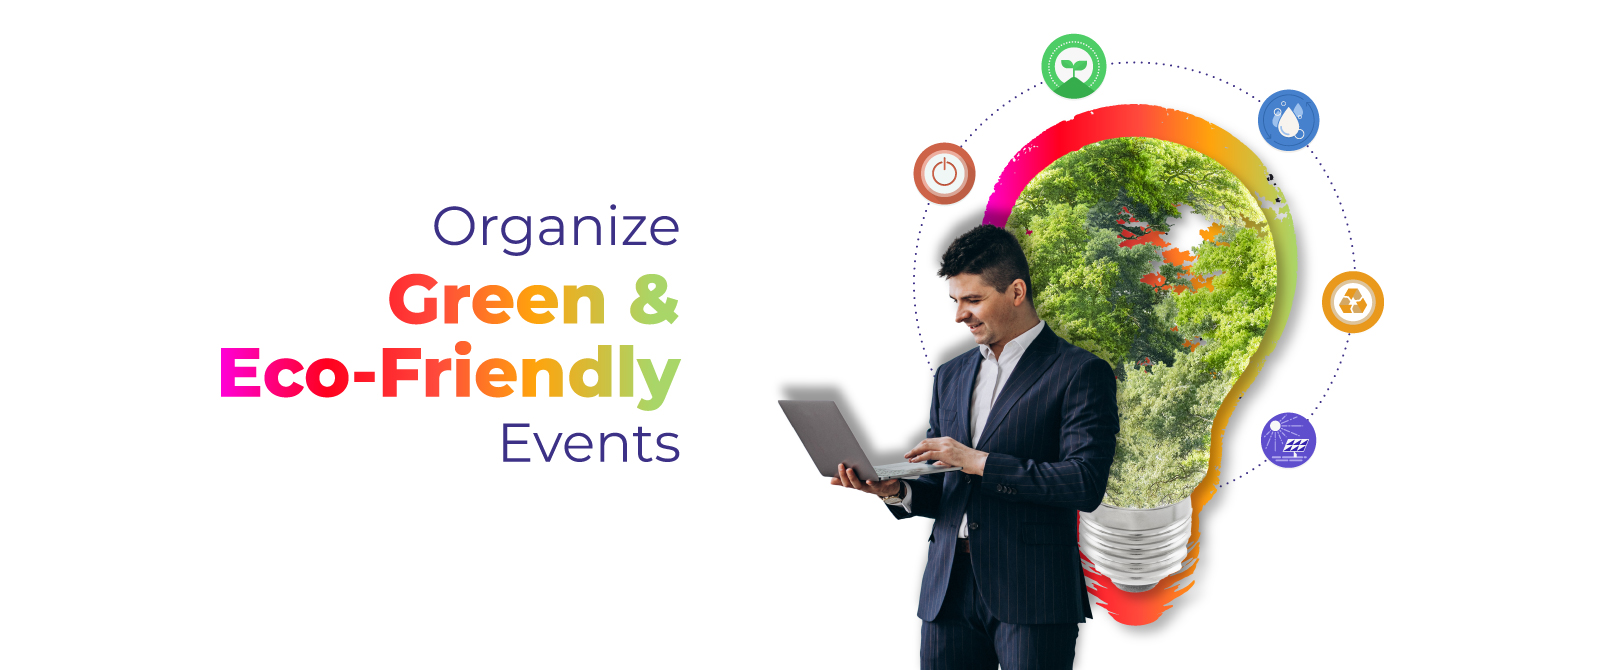 How to Make Your Events More Eco-Friendly & Sustainable?